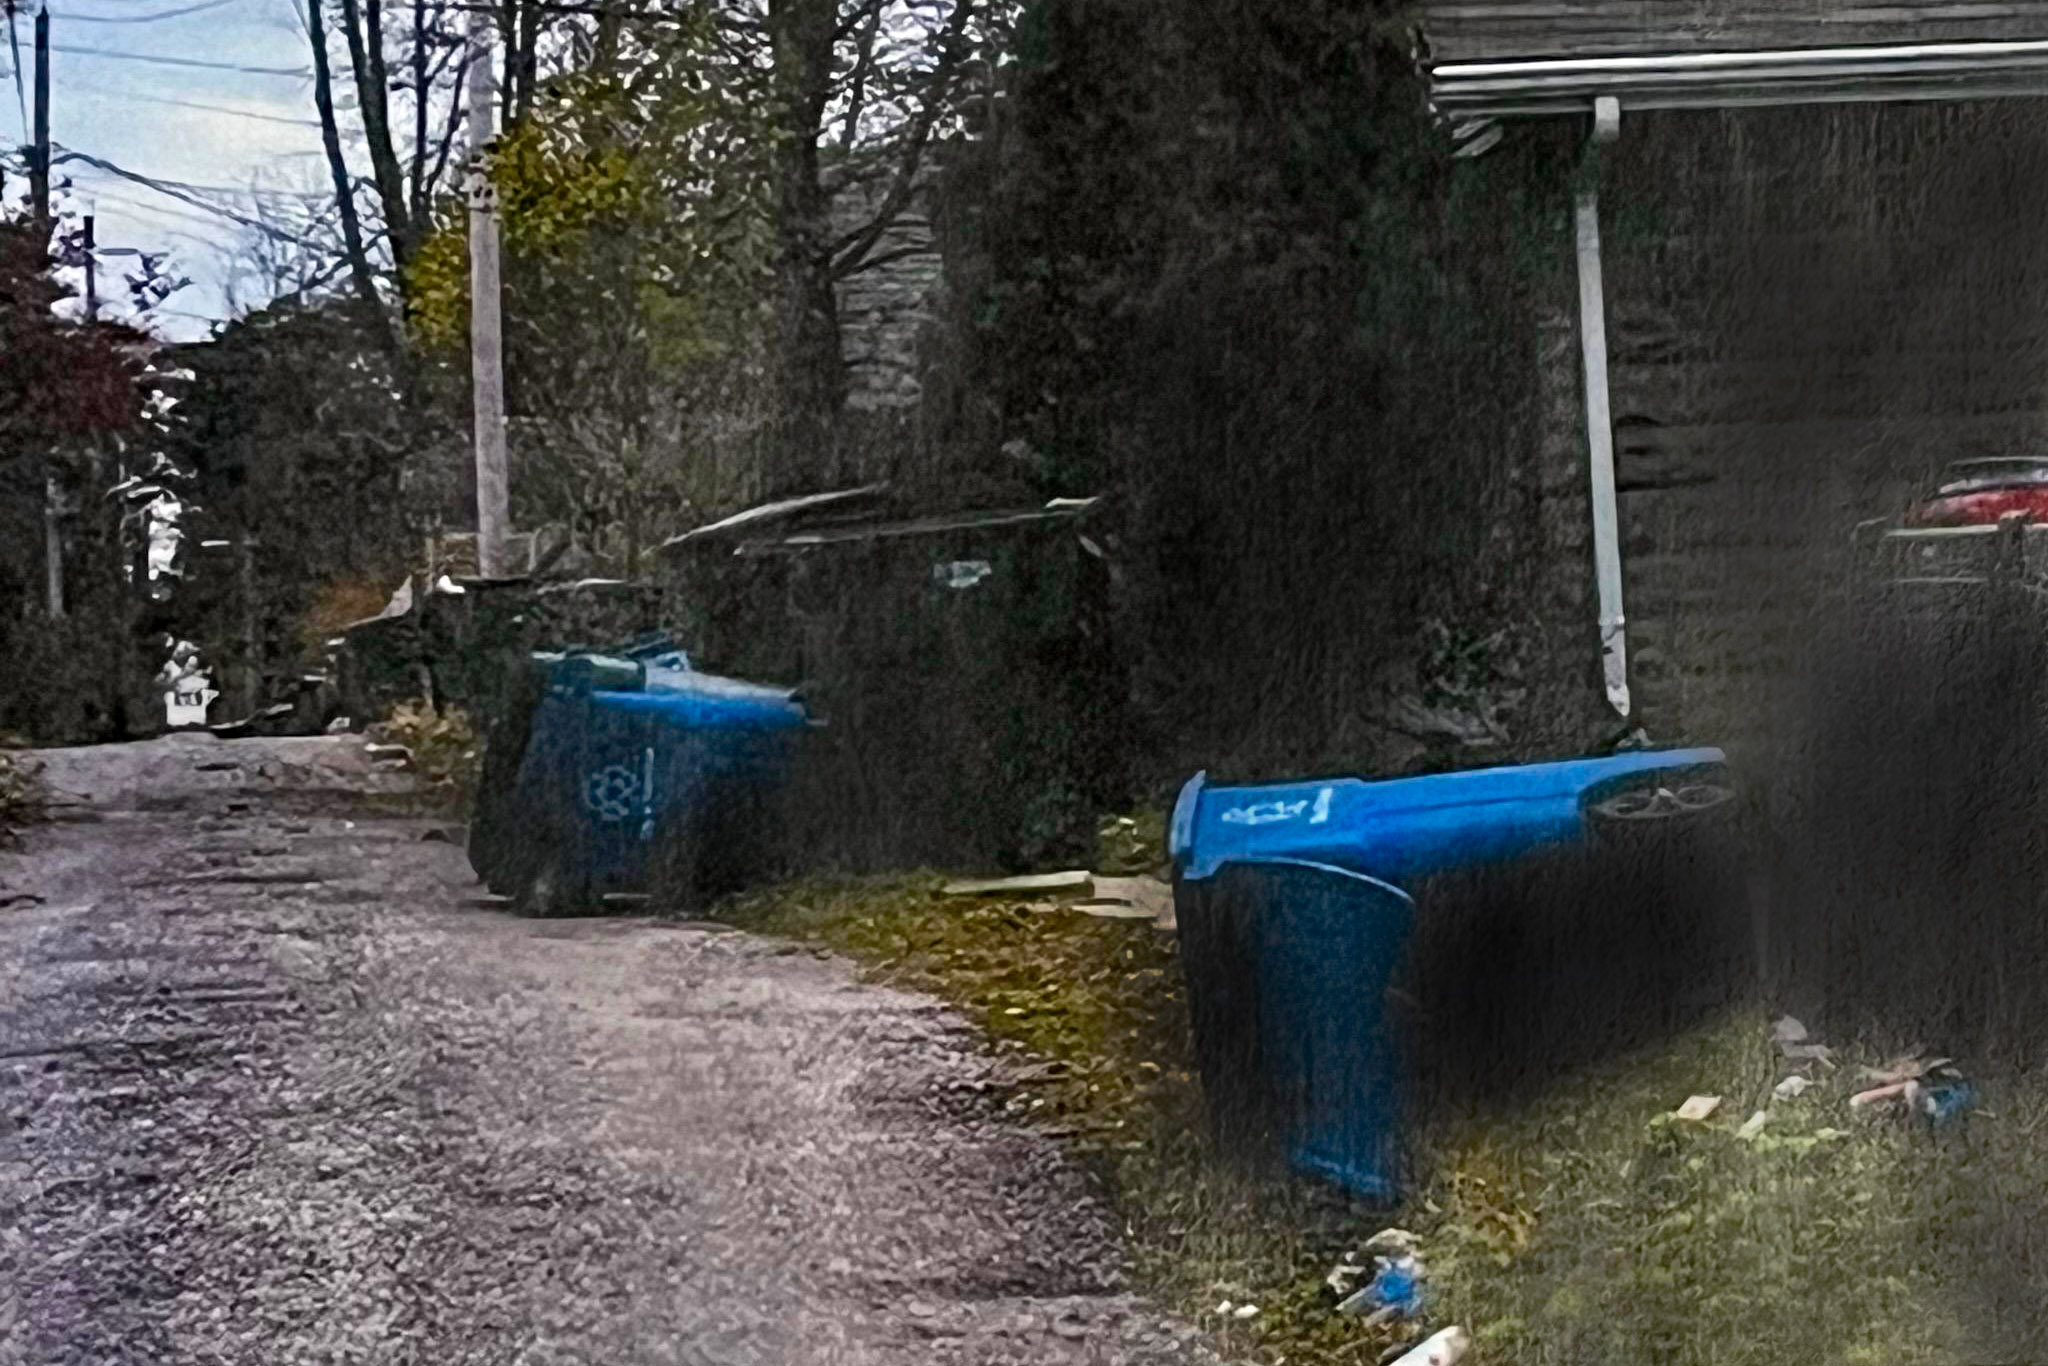 Residential garbage cans shown overturned in a small neighborhood alleyway.